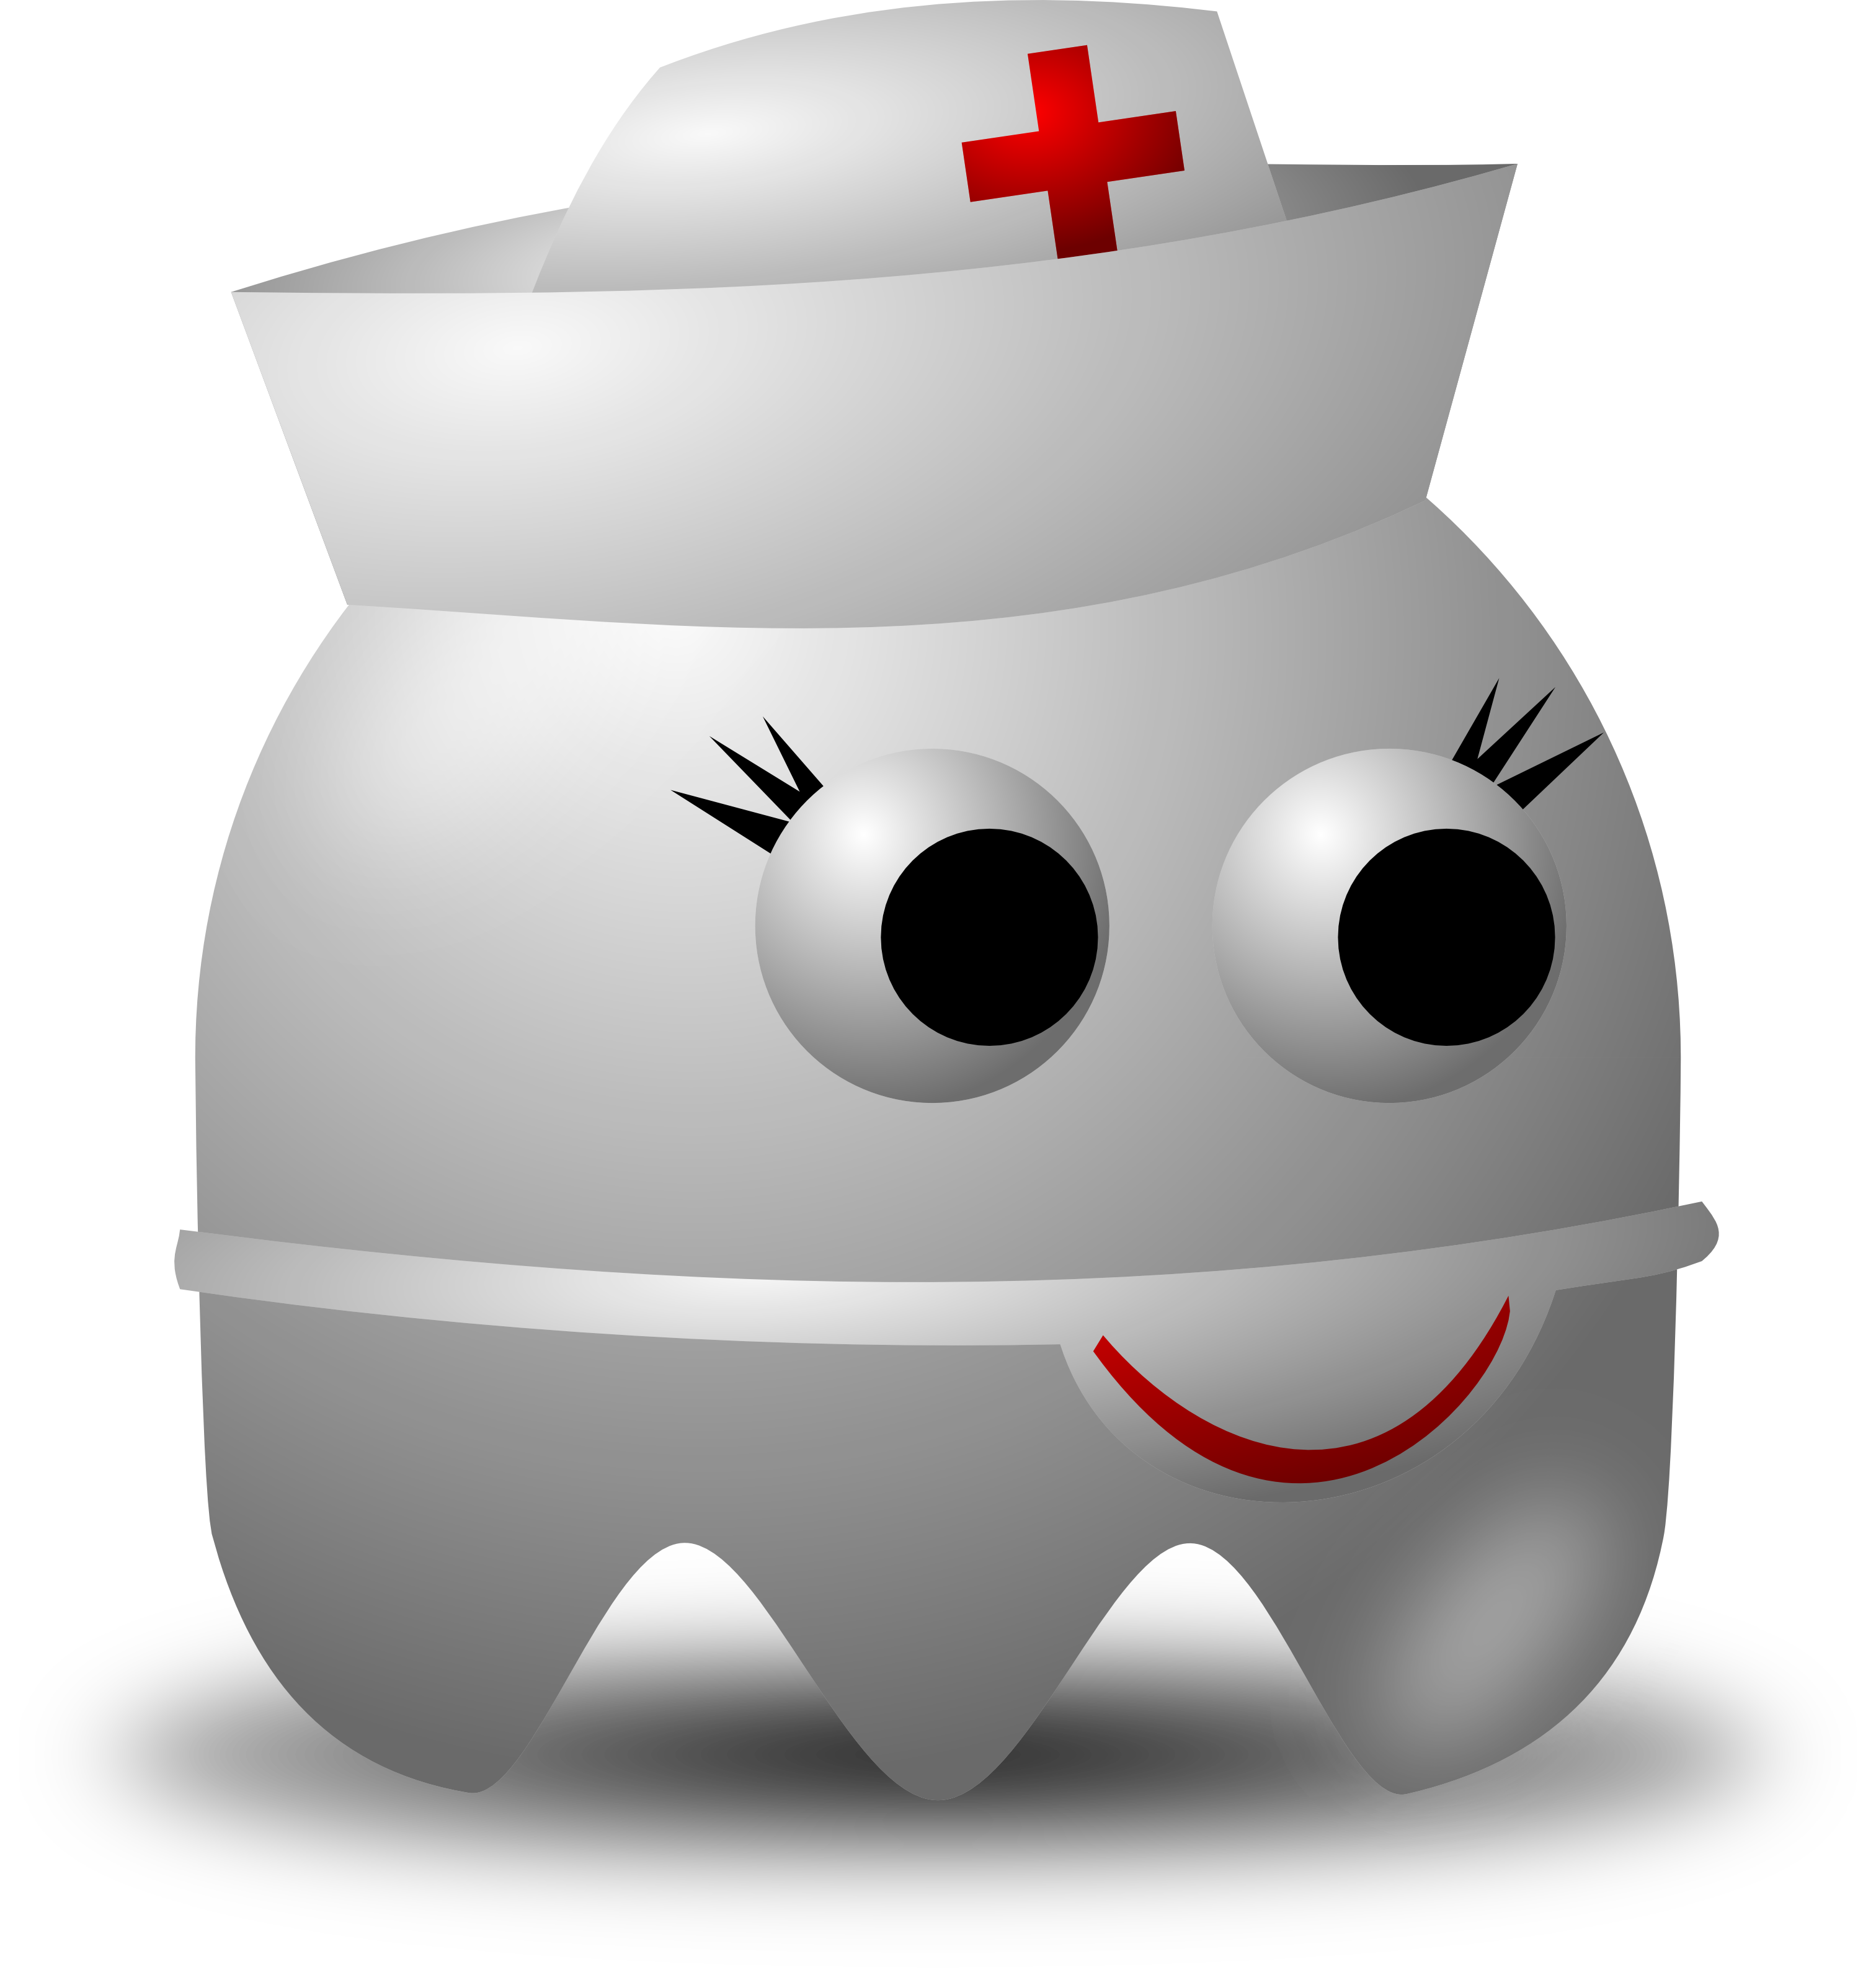 Registered Nurse Avatar Character Wearing A Hat - Free Vector Clipart